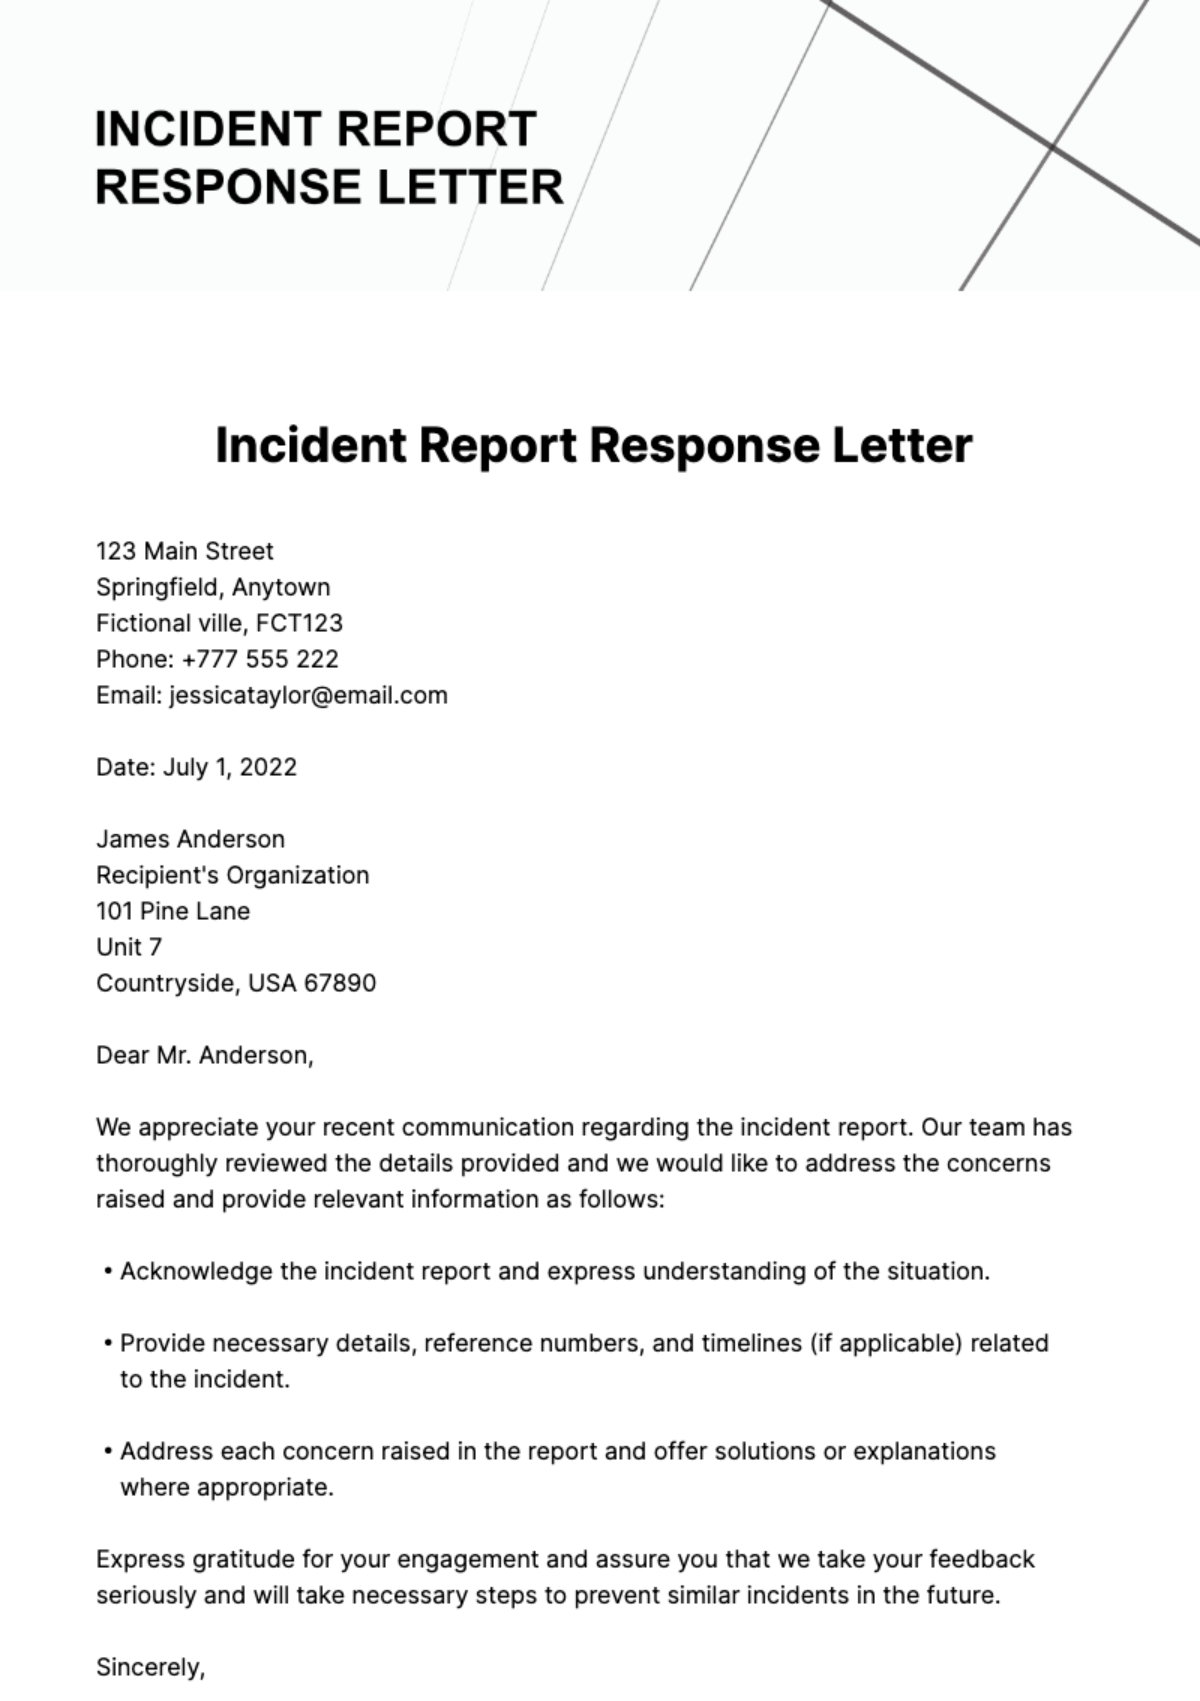 Incident Report Response Letter Template